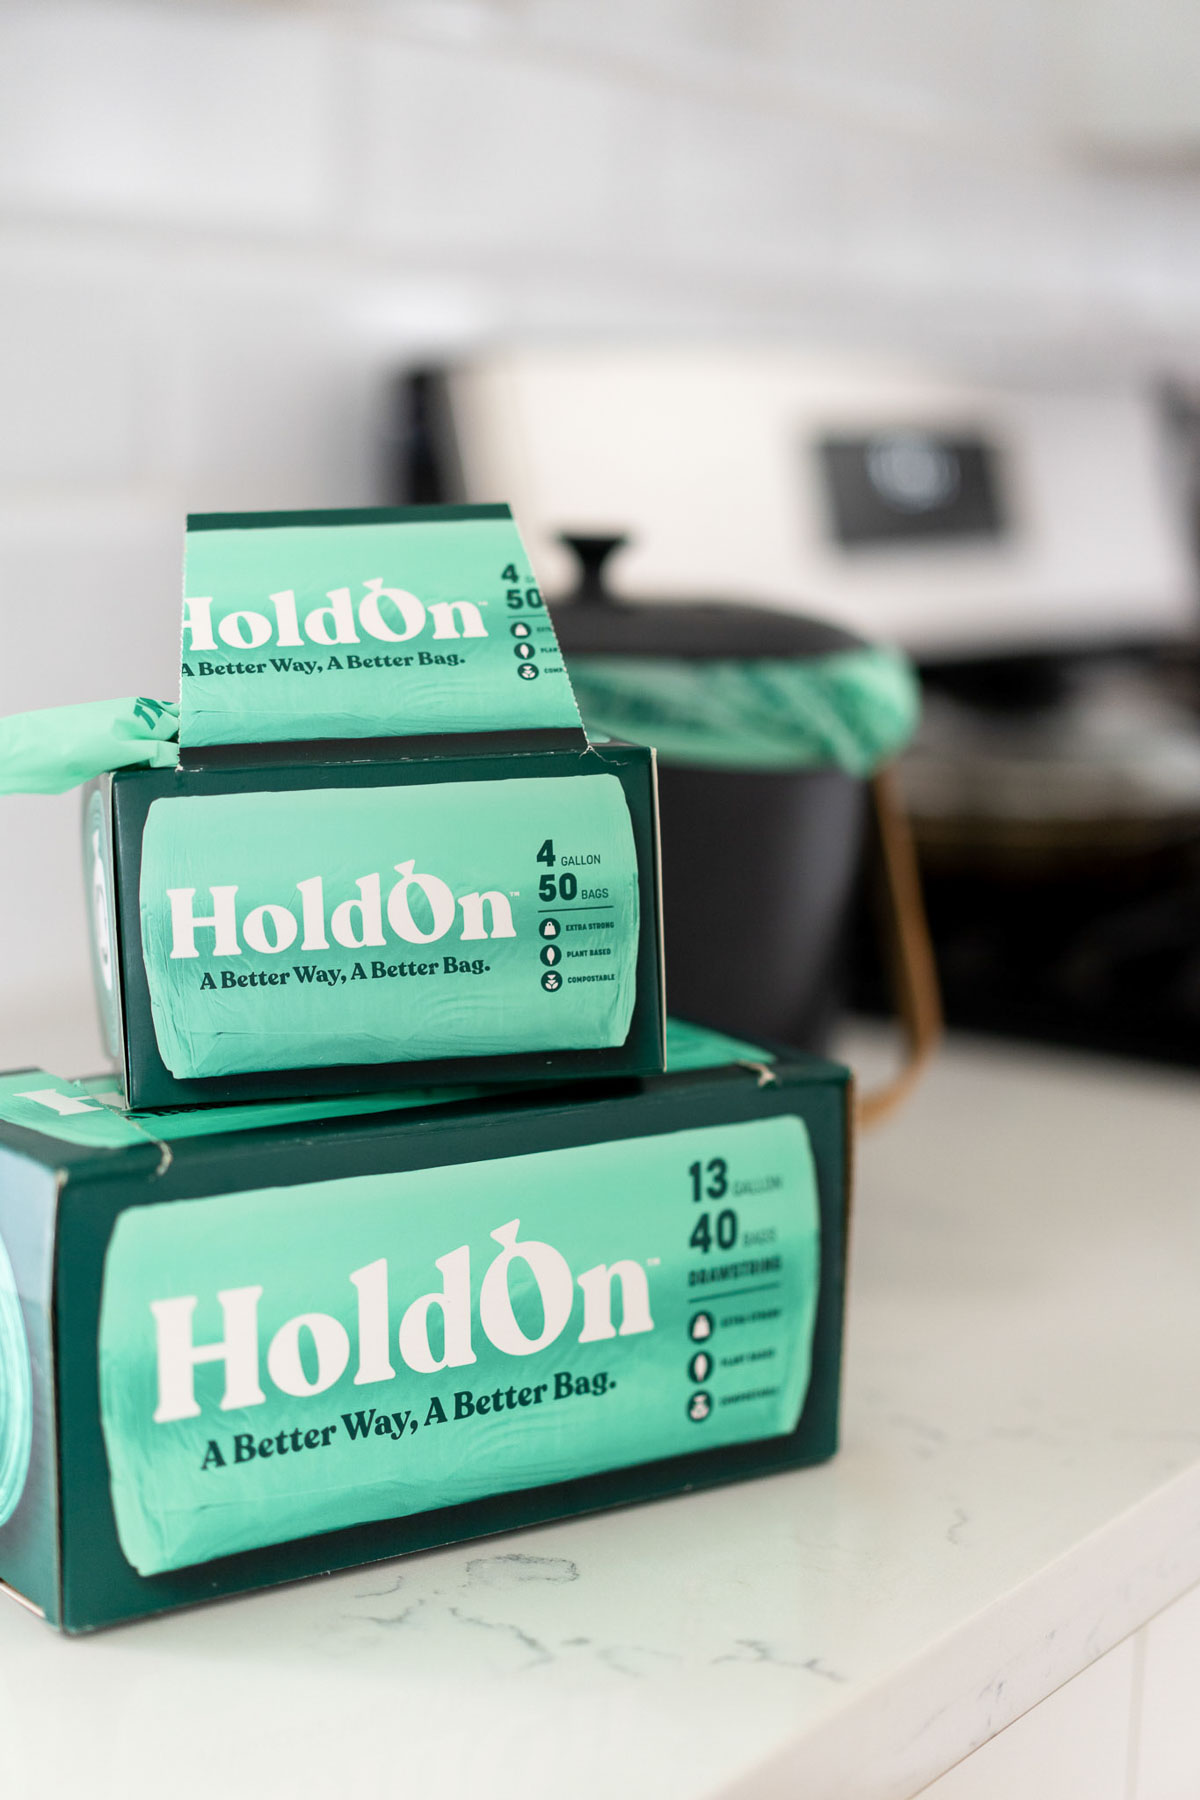 We used HoldOn's compostable trash and storage bags for a few